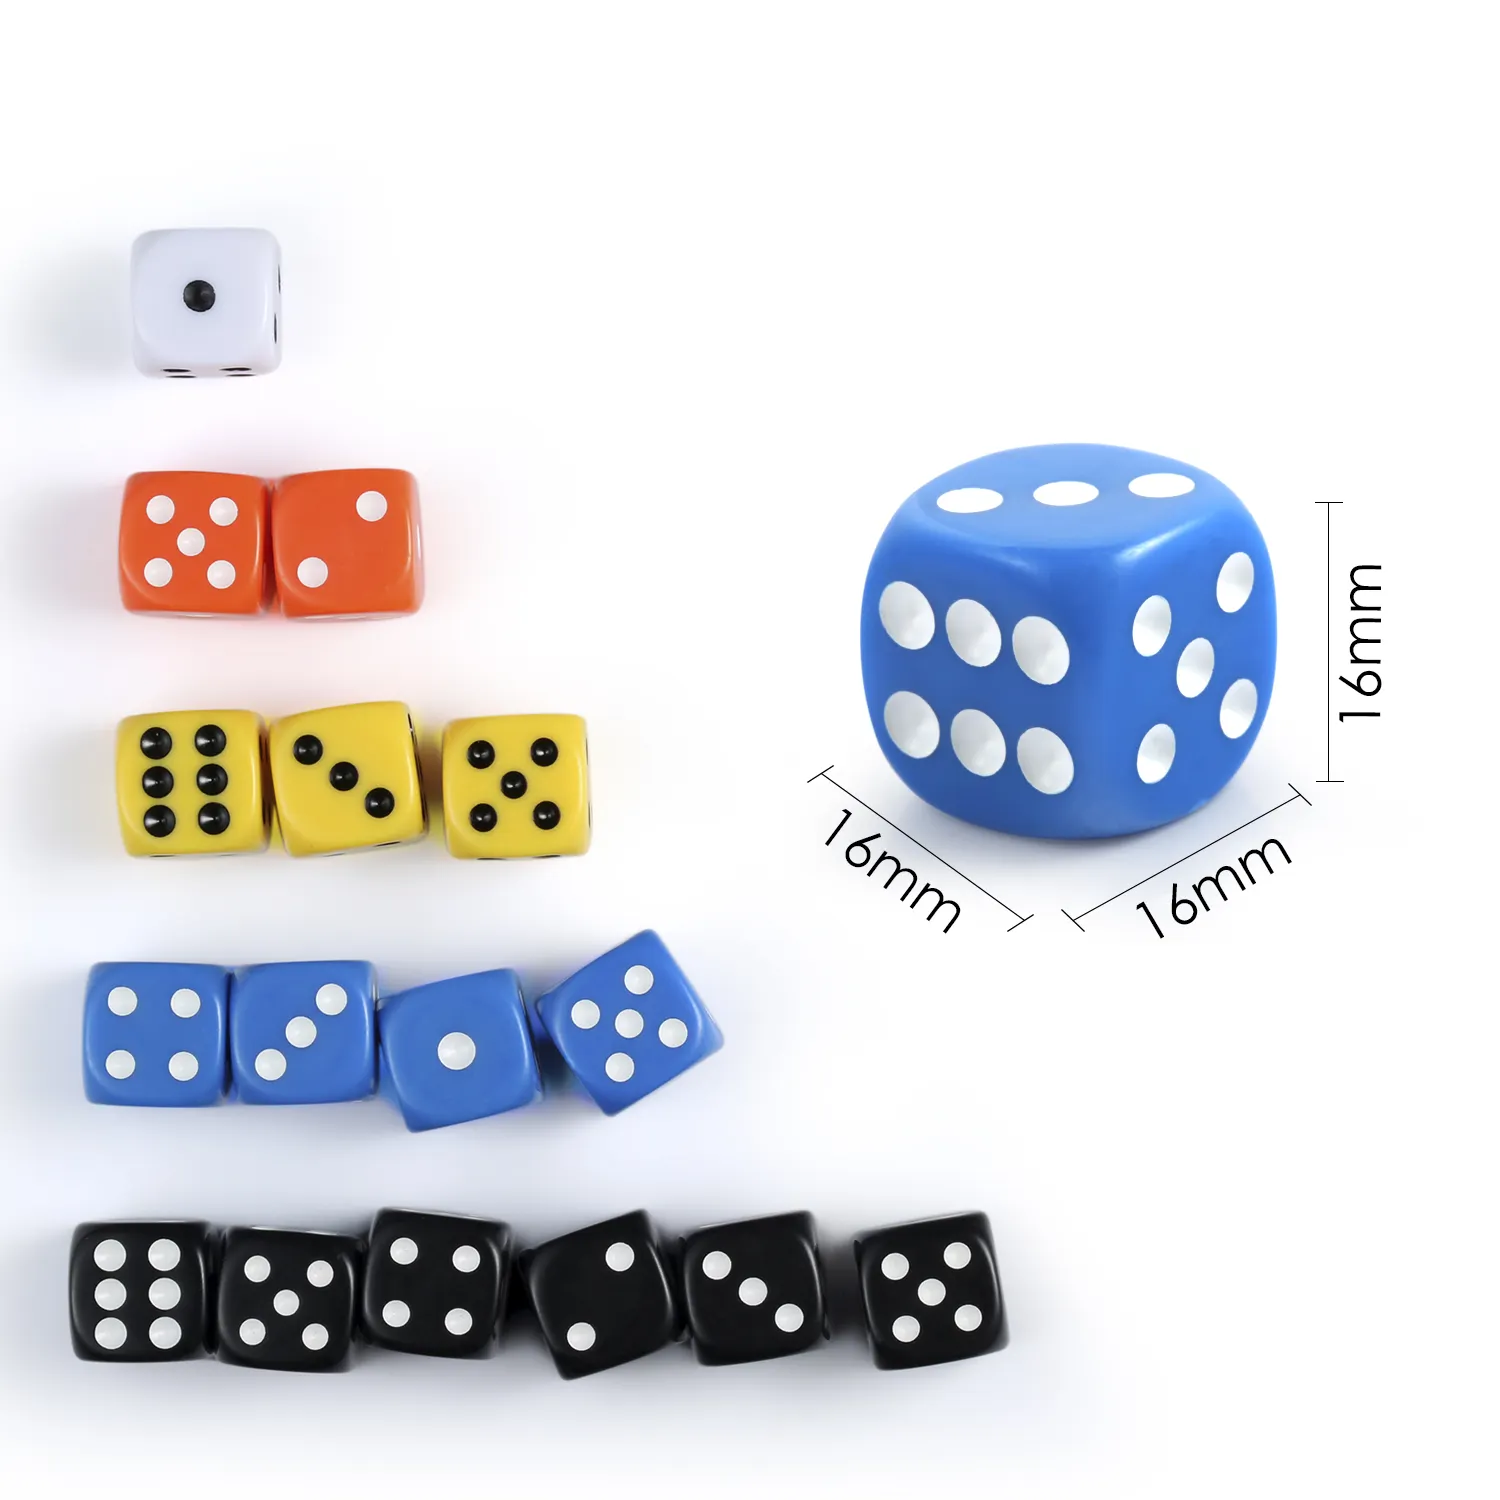 100 PCS 16ミリメートル6-Sided Rounded Corner Dice Set Standard Size D6 GameでDice 10 Different Solid Colors CaseためPlaying Games Dice